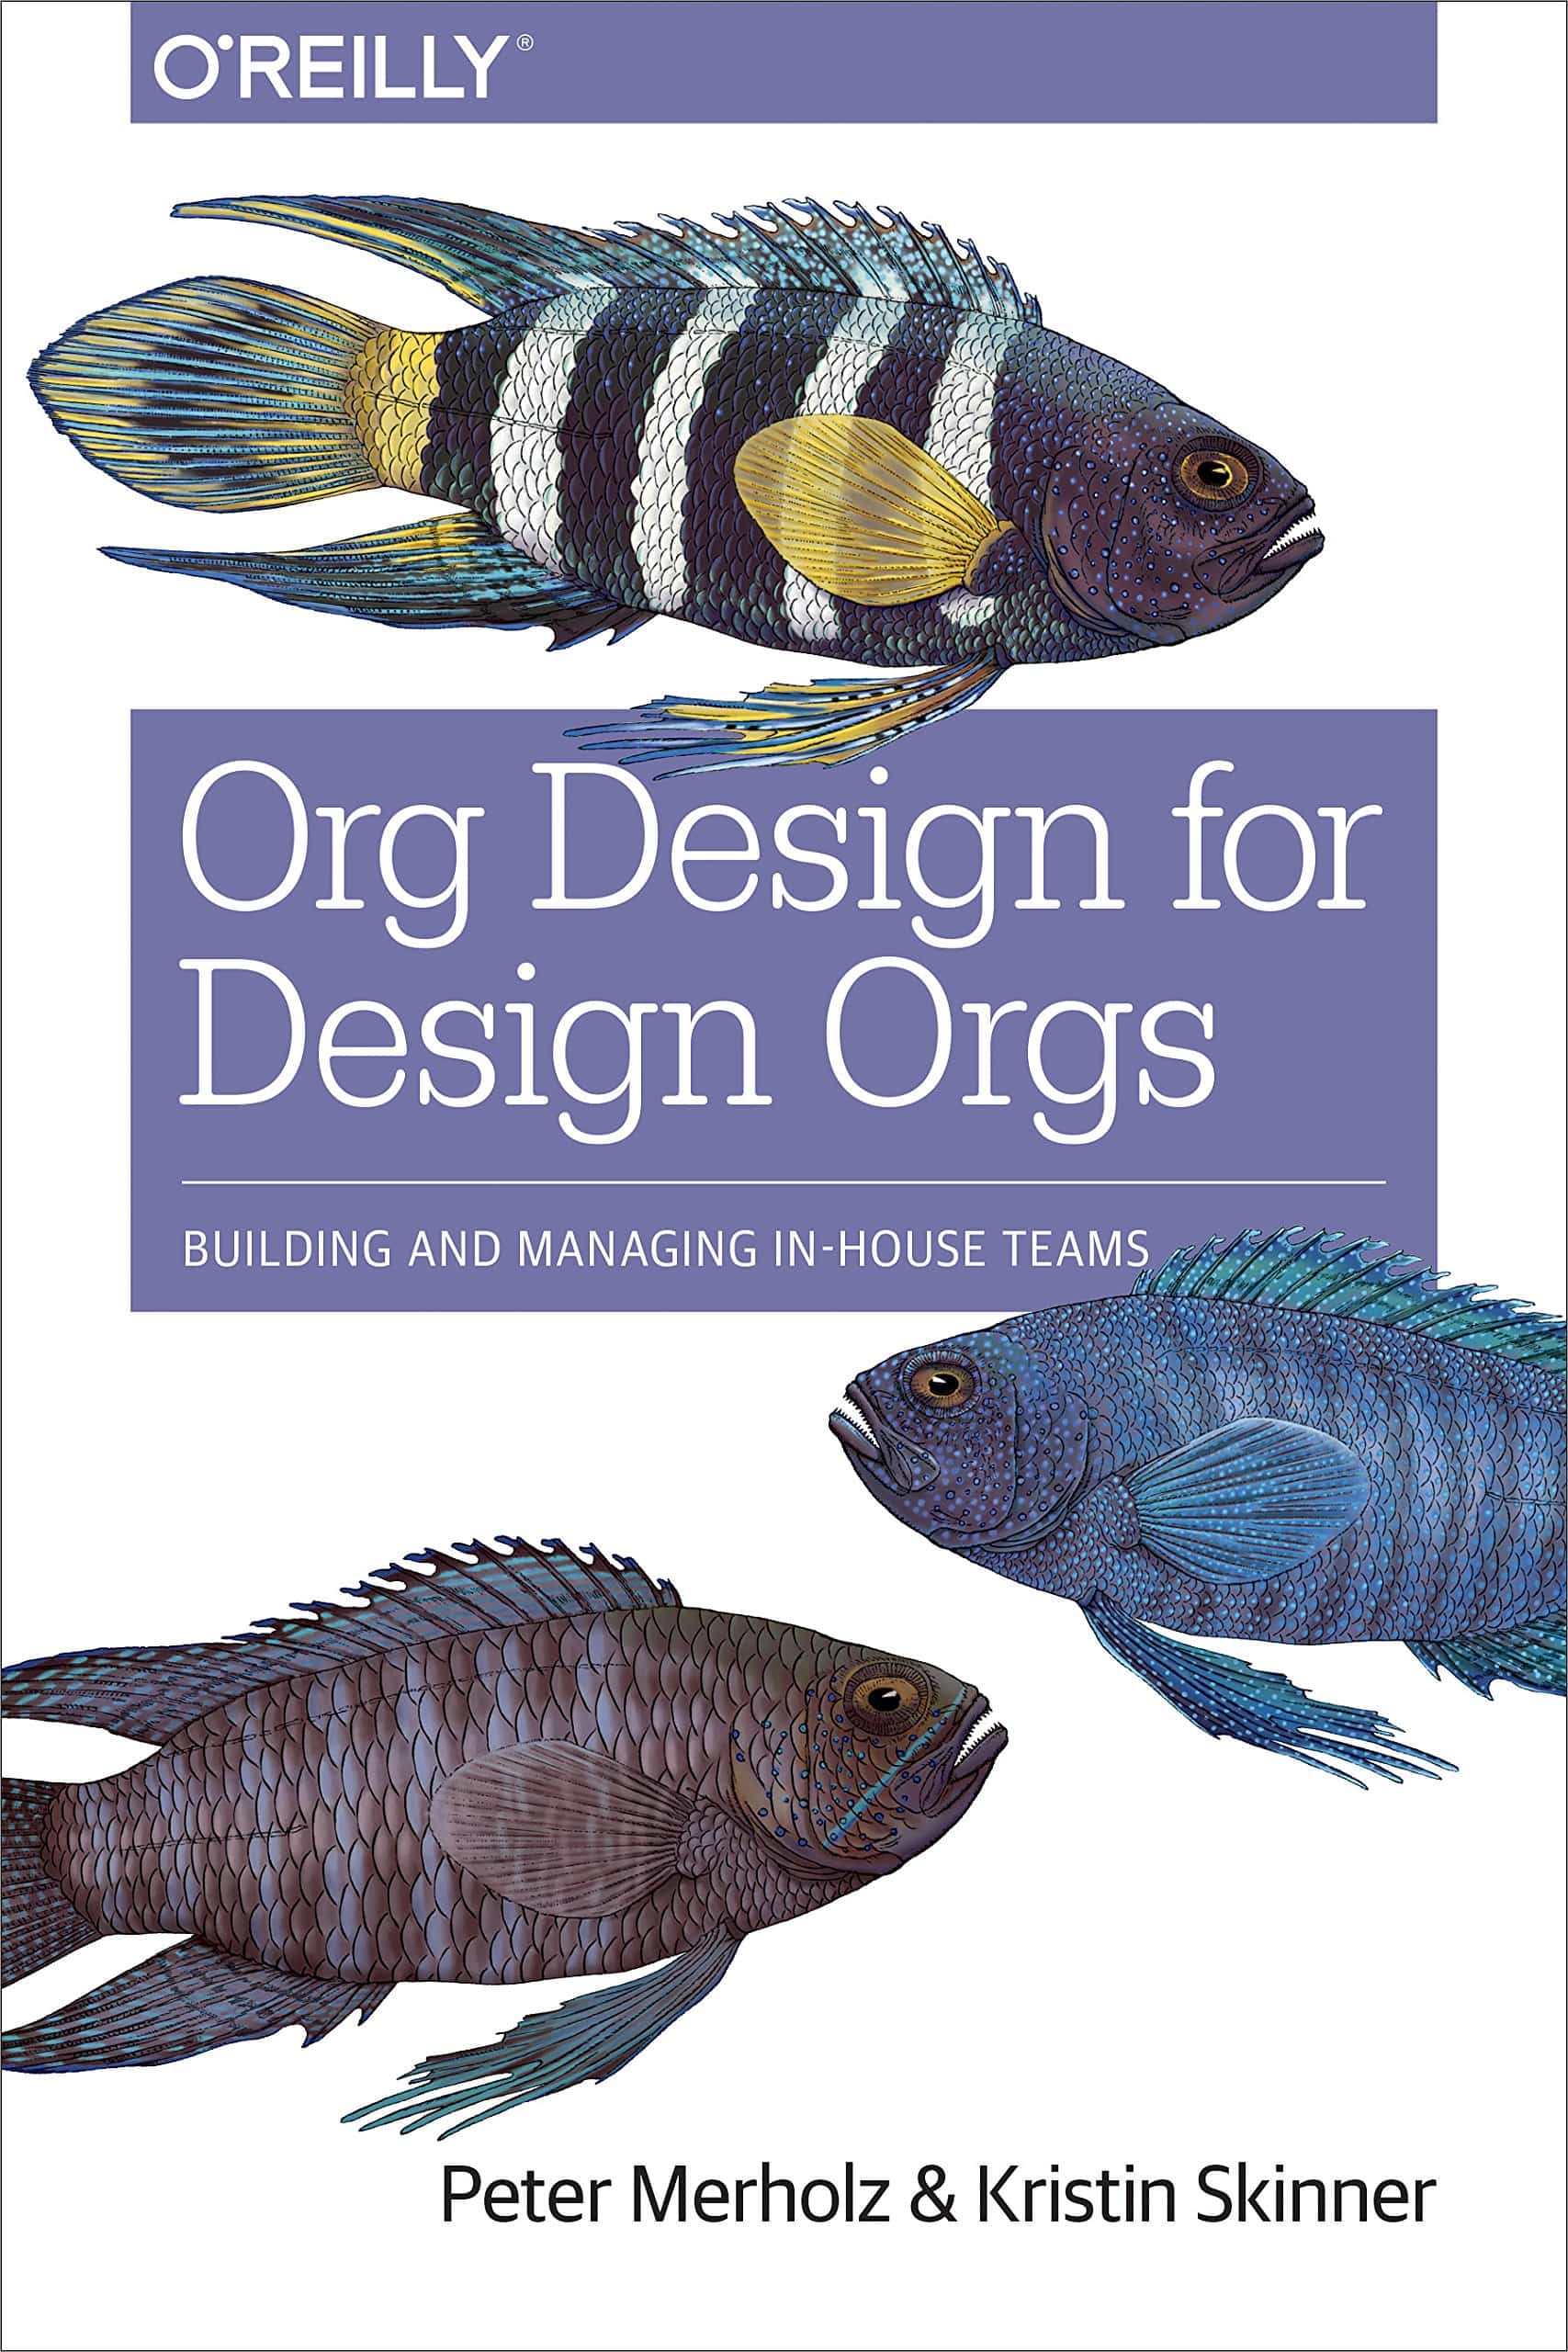 The cover of Org Design for Design Orgs